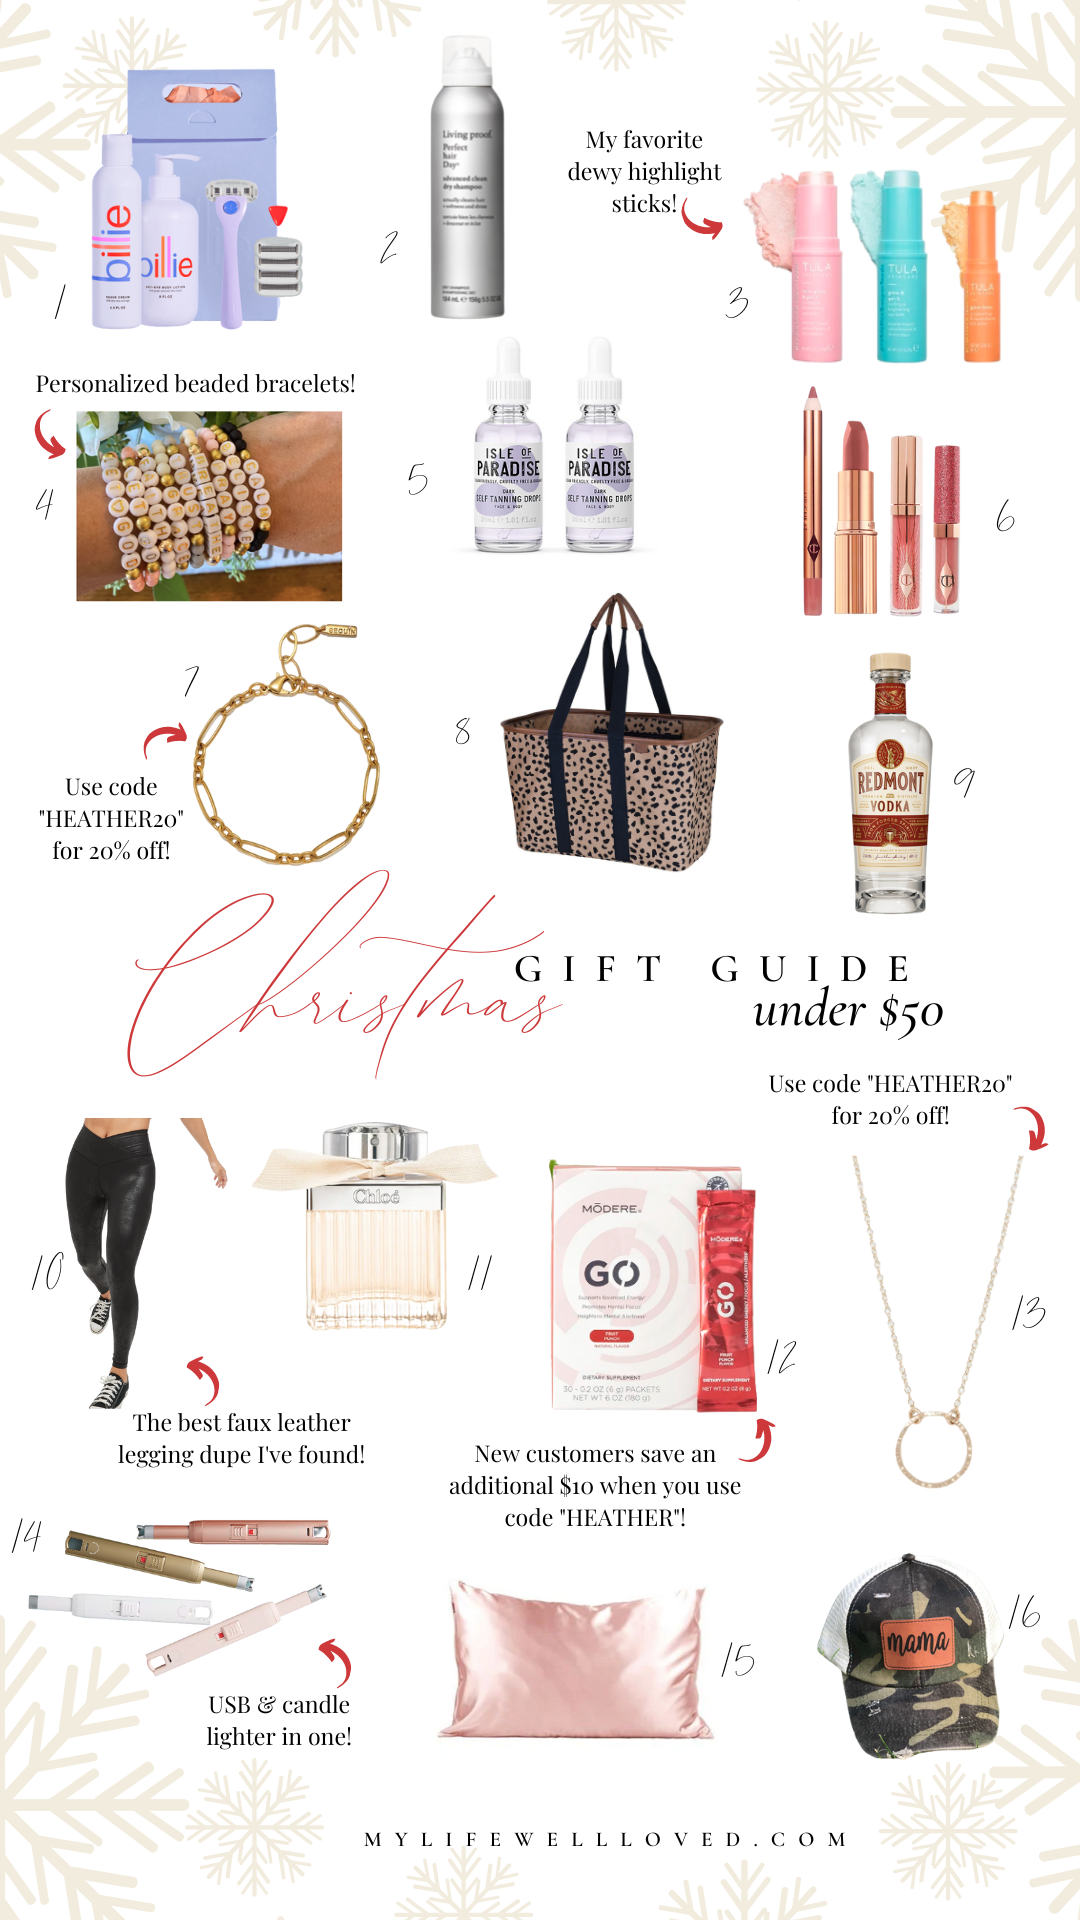 Holiday Shopping: 16 Christmas Gifts Under 50 Dollars For Her (That She'll Love!)